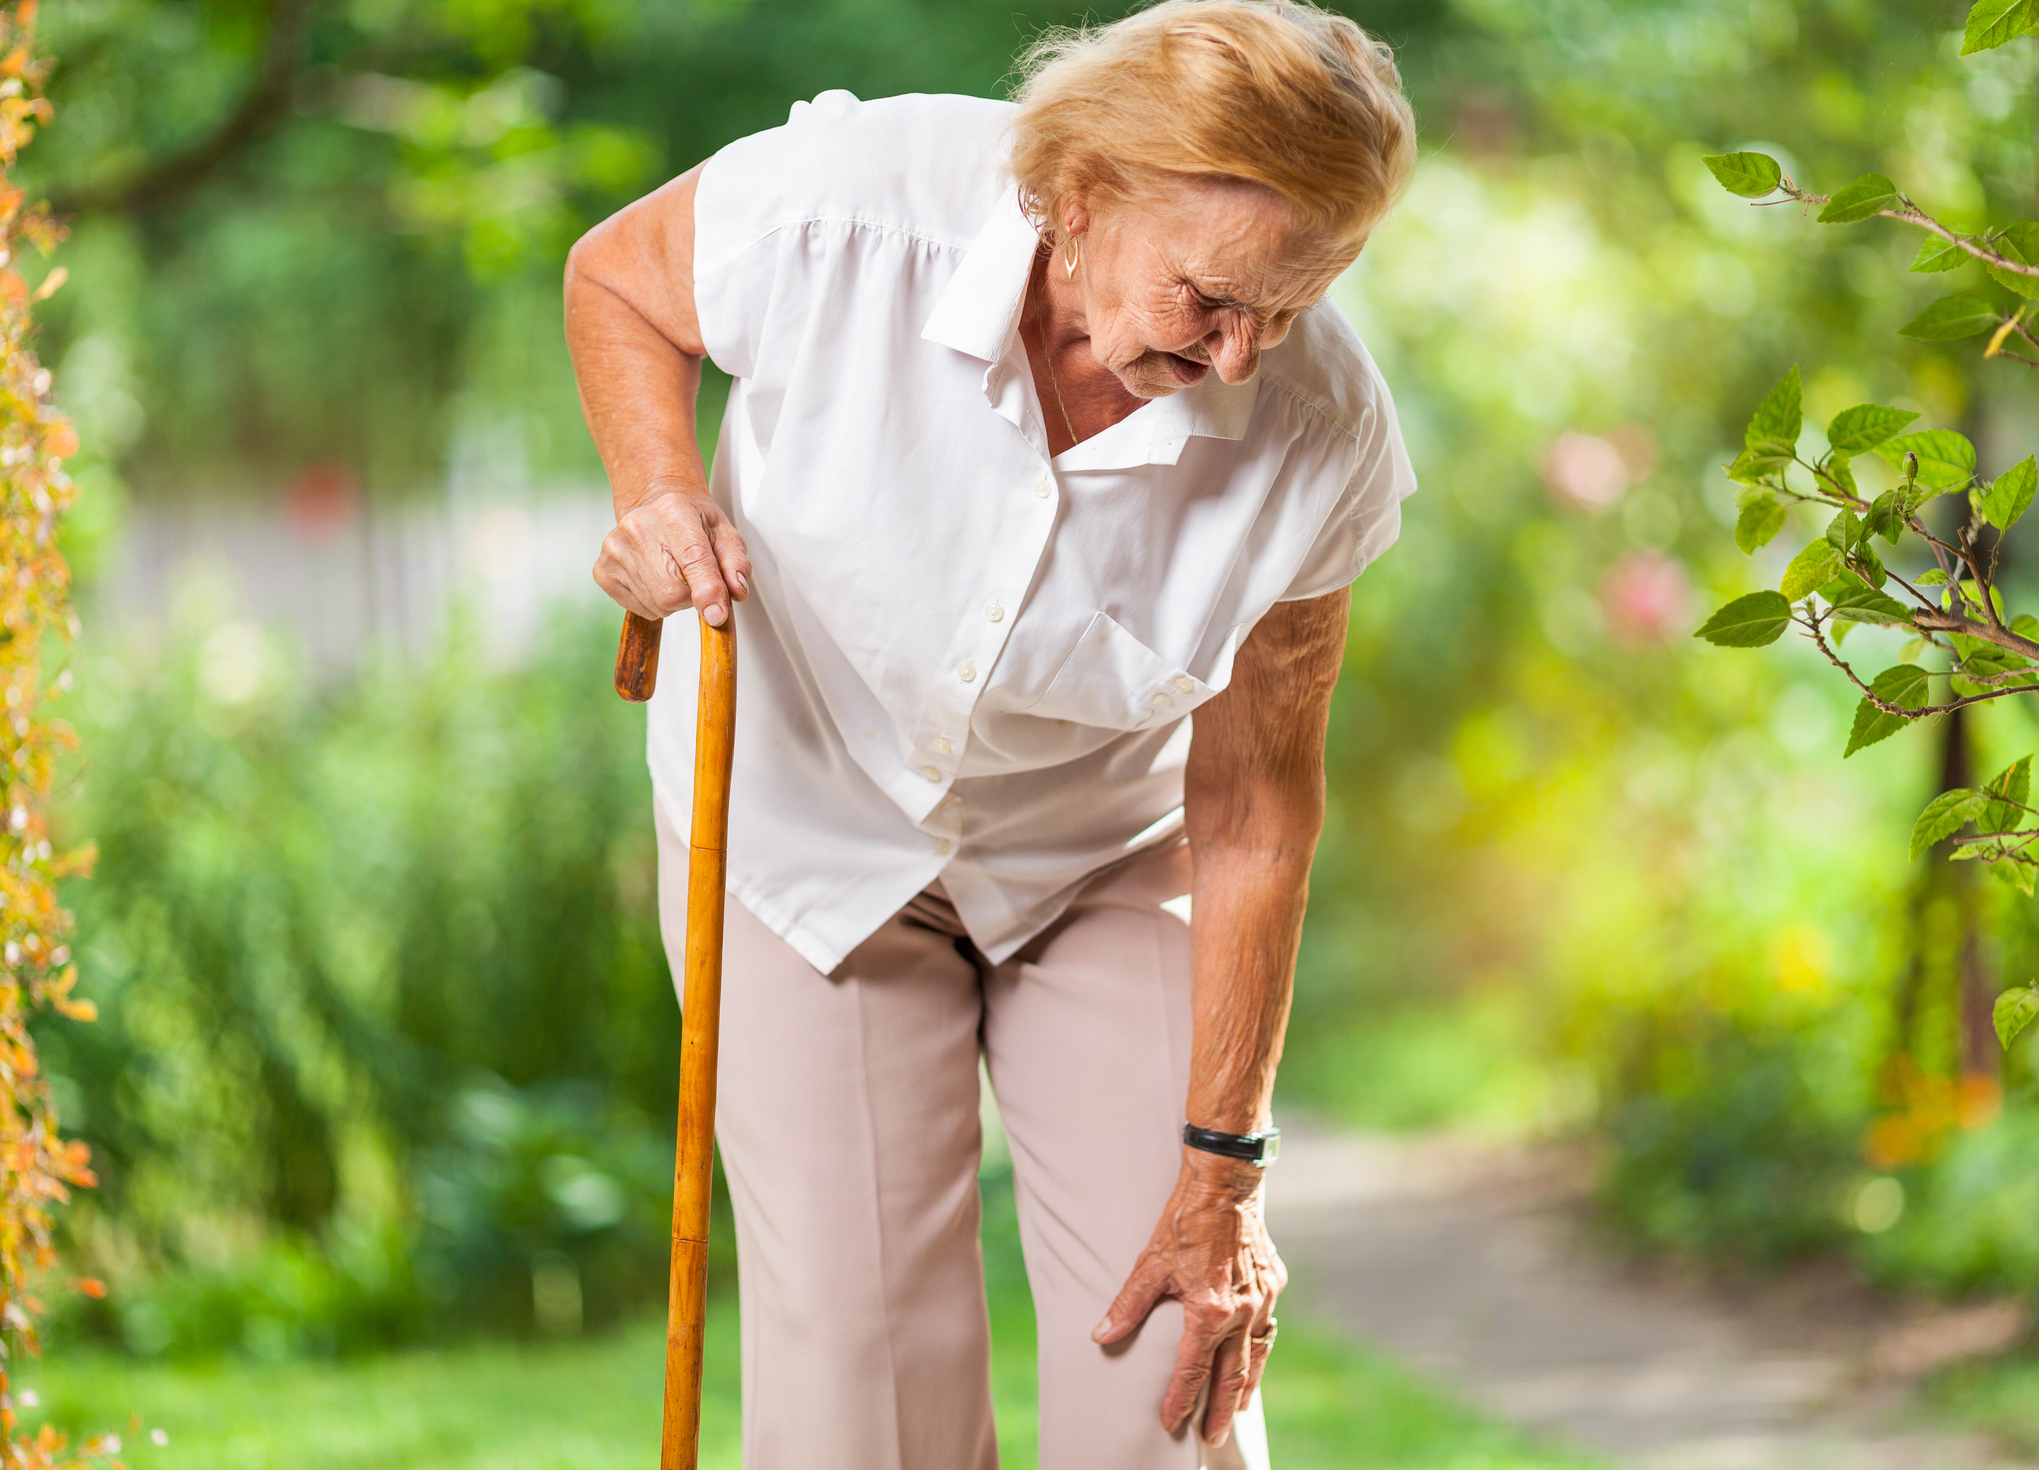 Joint and knee stiffness from osteoarthritis can increase the risk of falls for older adults.